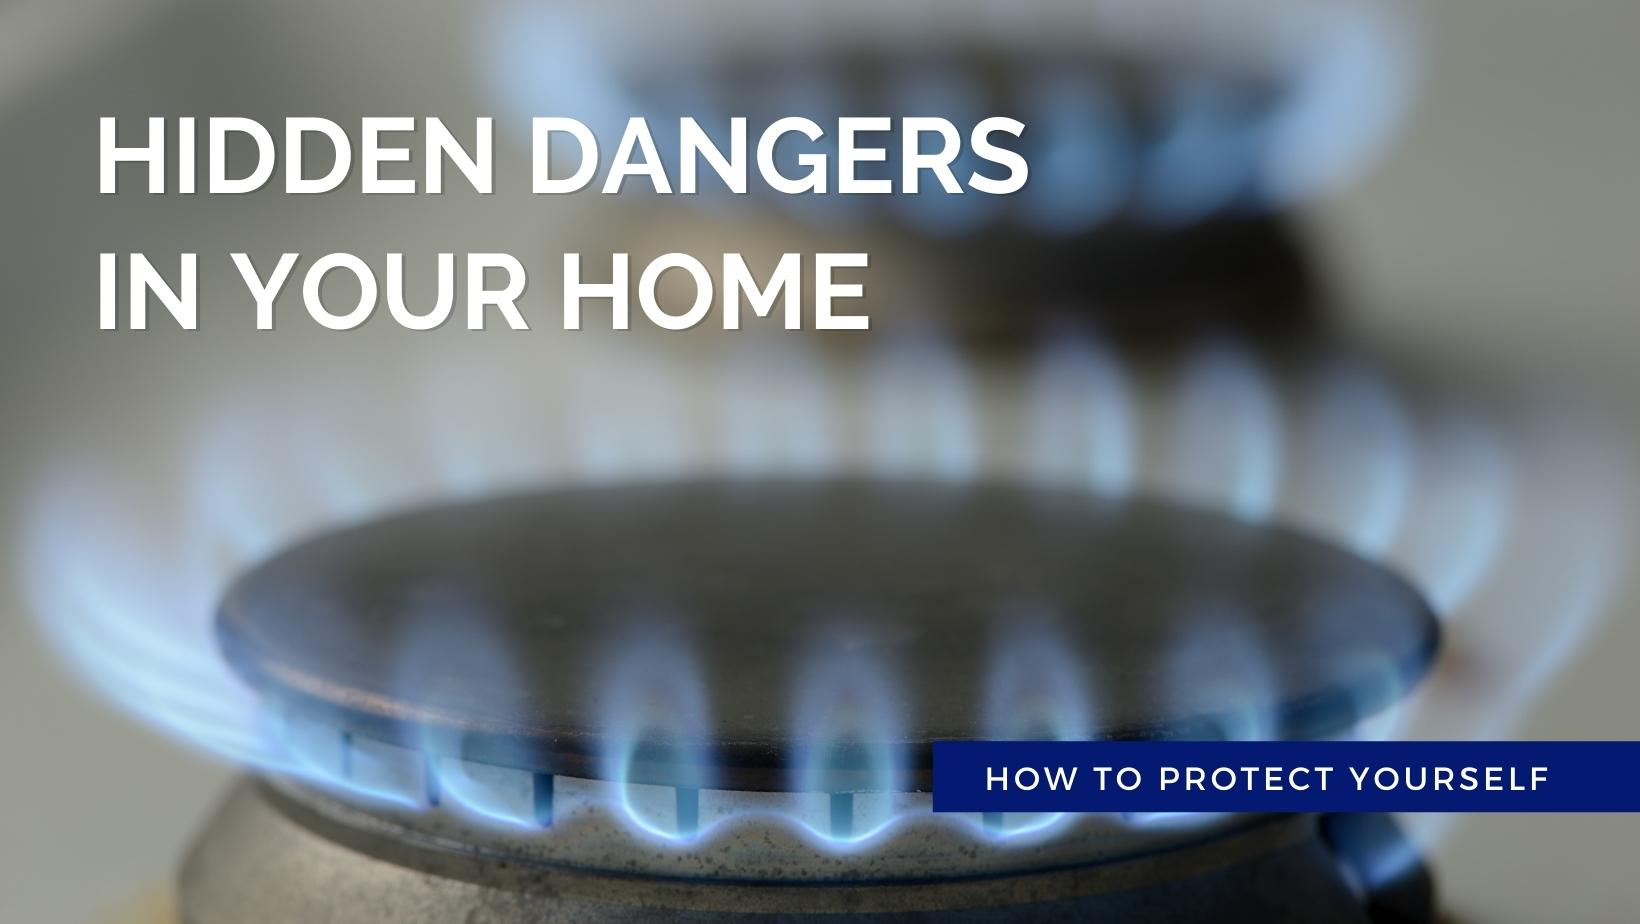 A gas stove flame dances dangerously. Text reads "hidden dangers in your home."